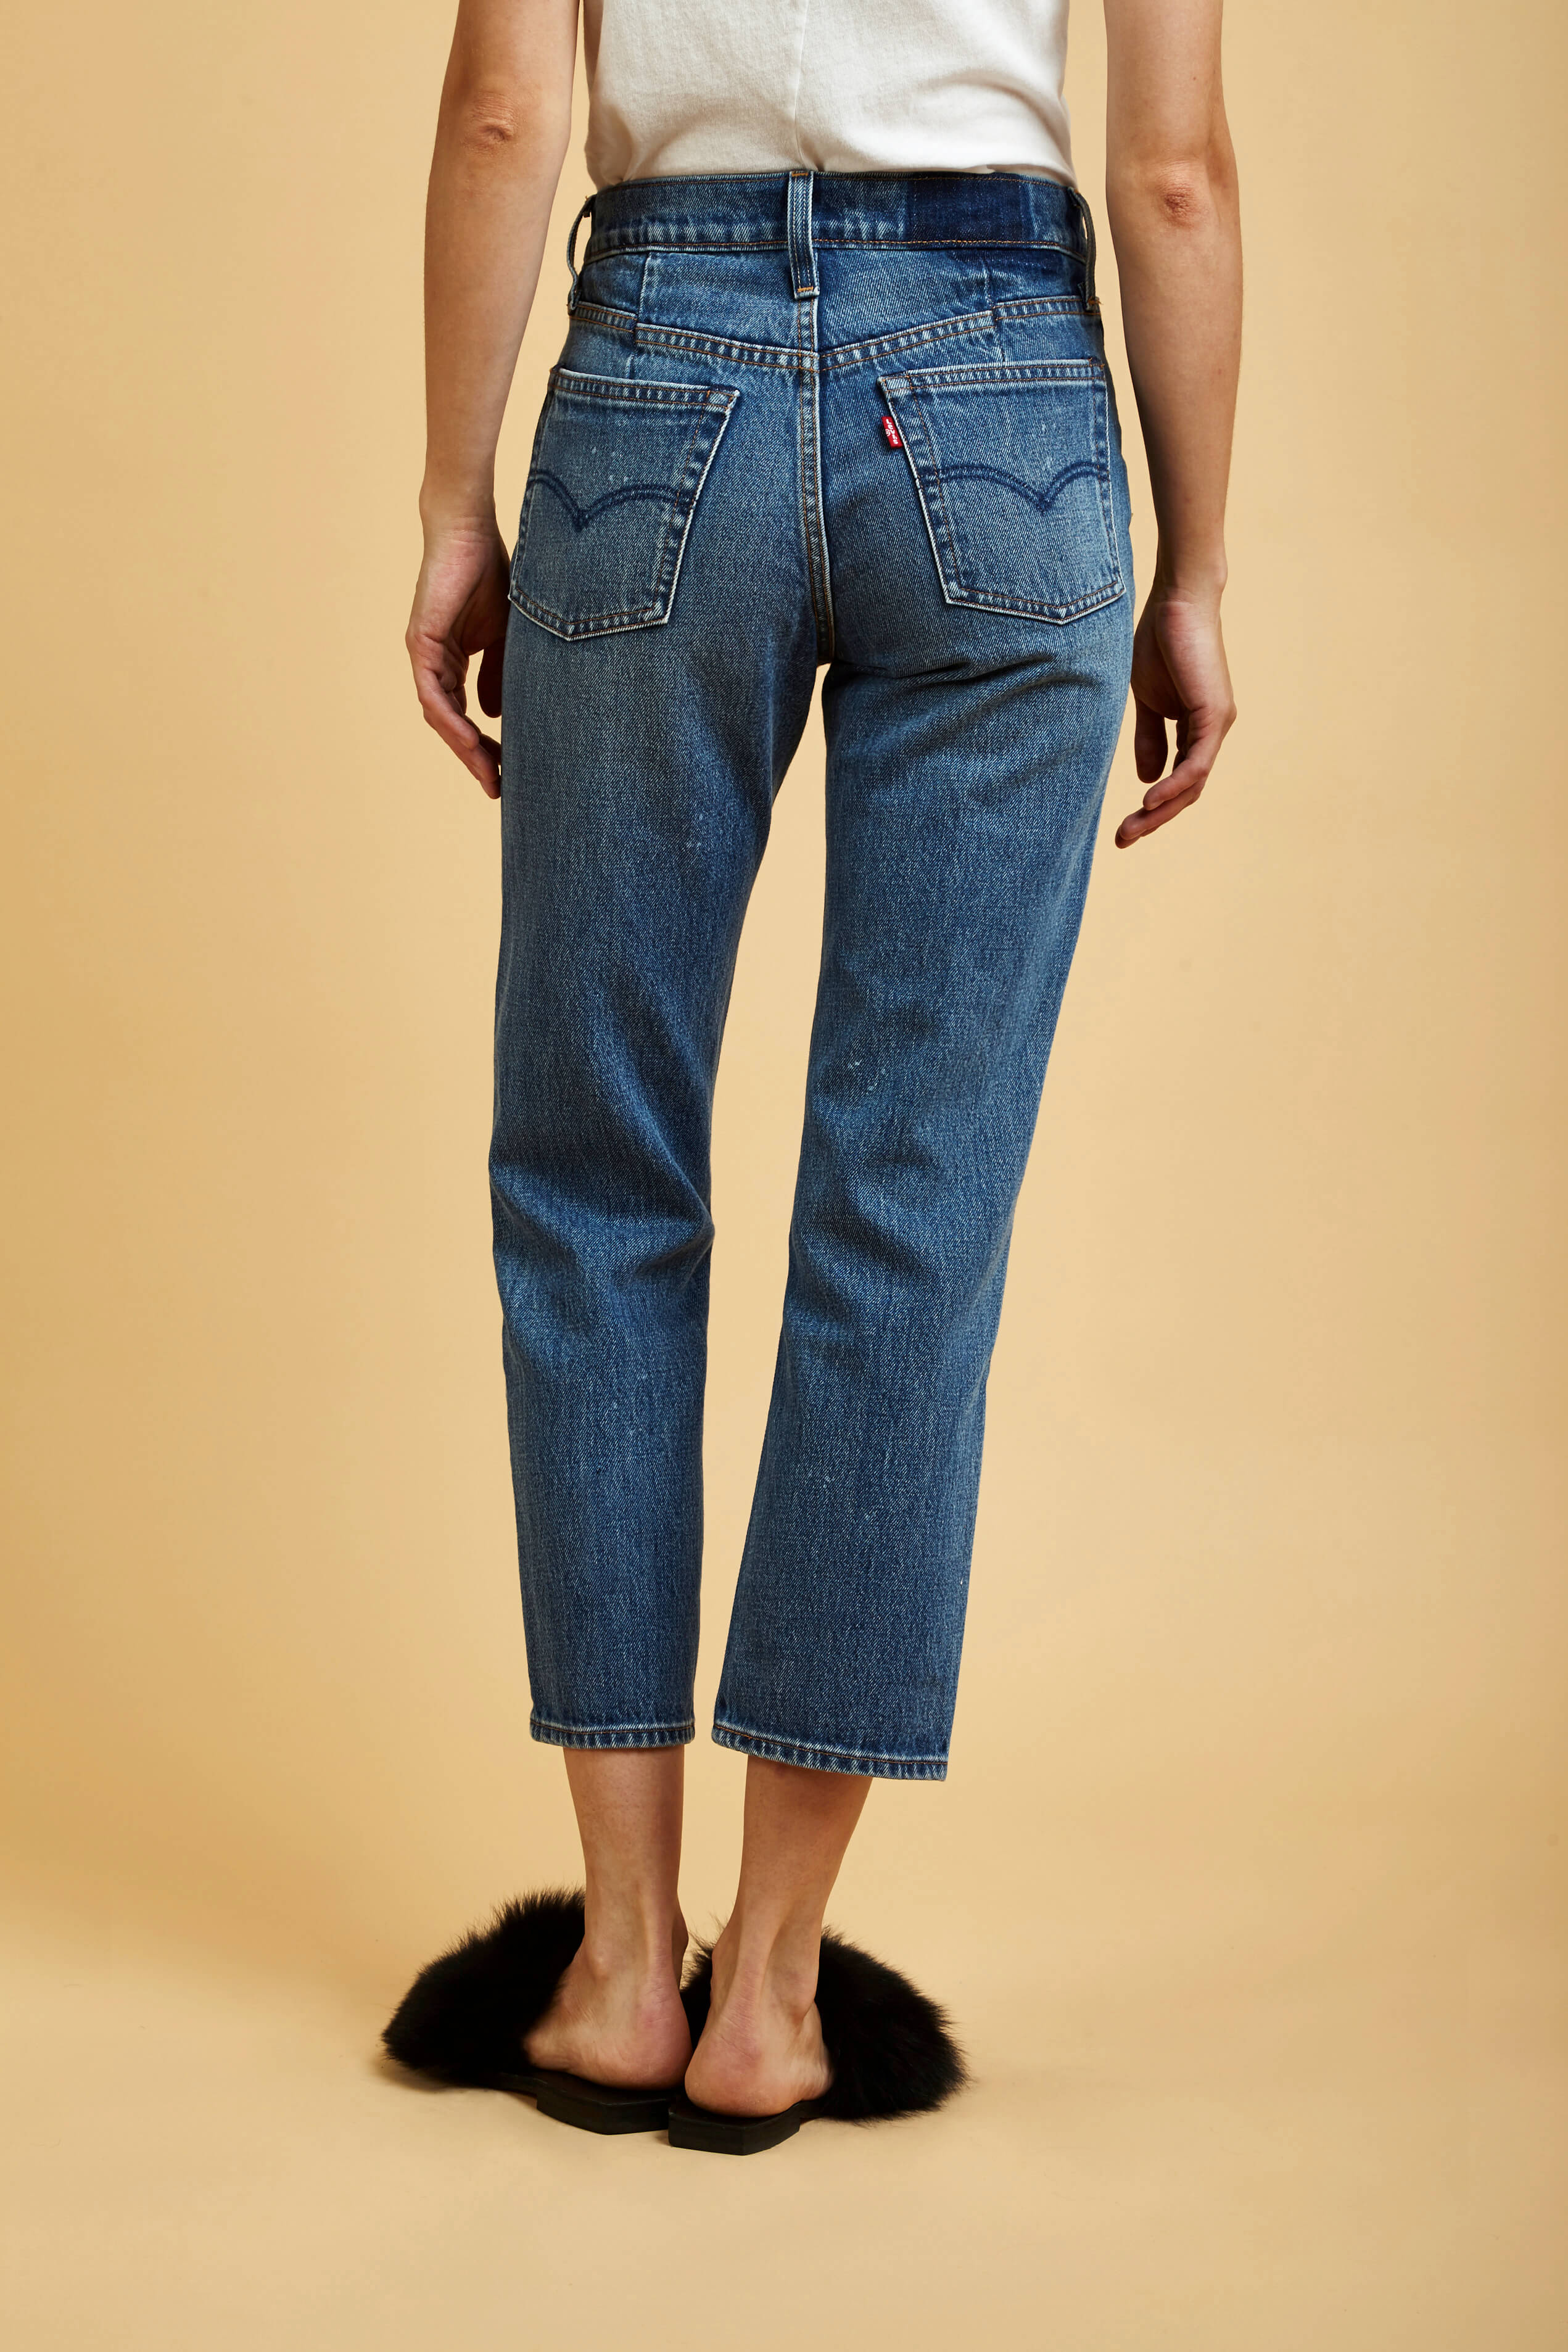 Levi's Waterless Altered Straight Jeans | FAUBOURG